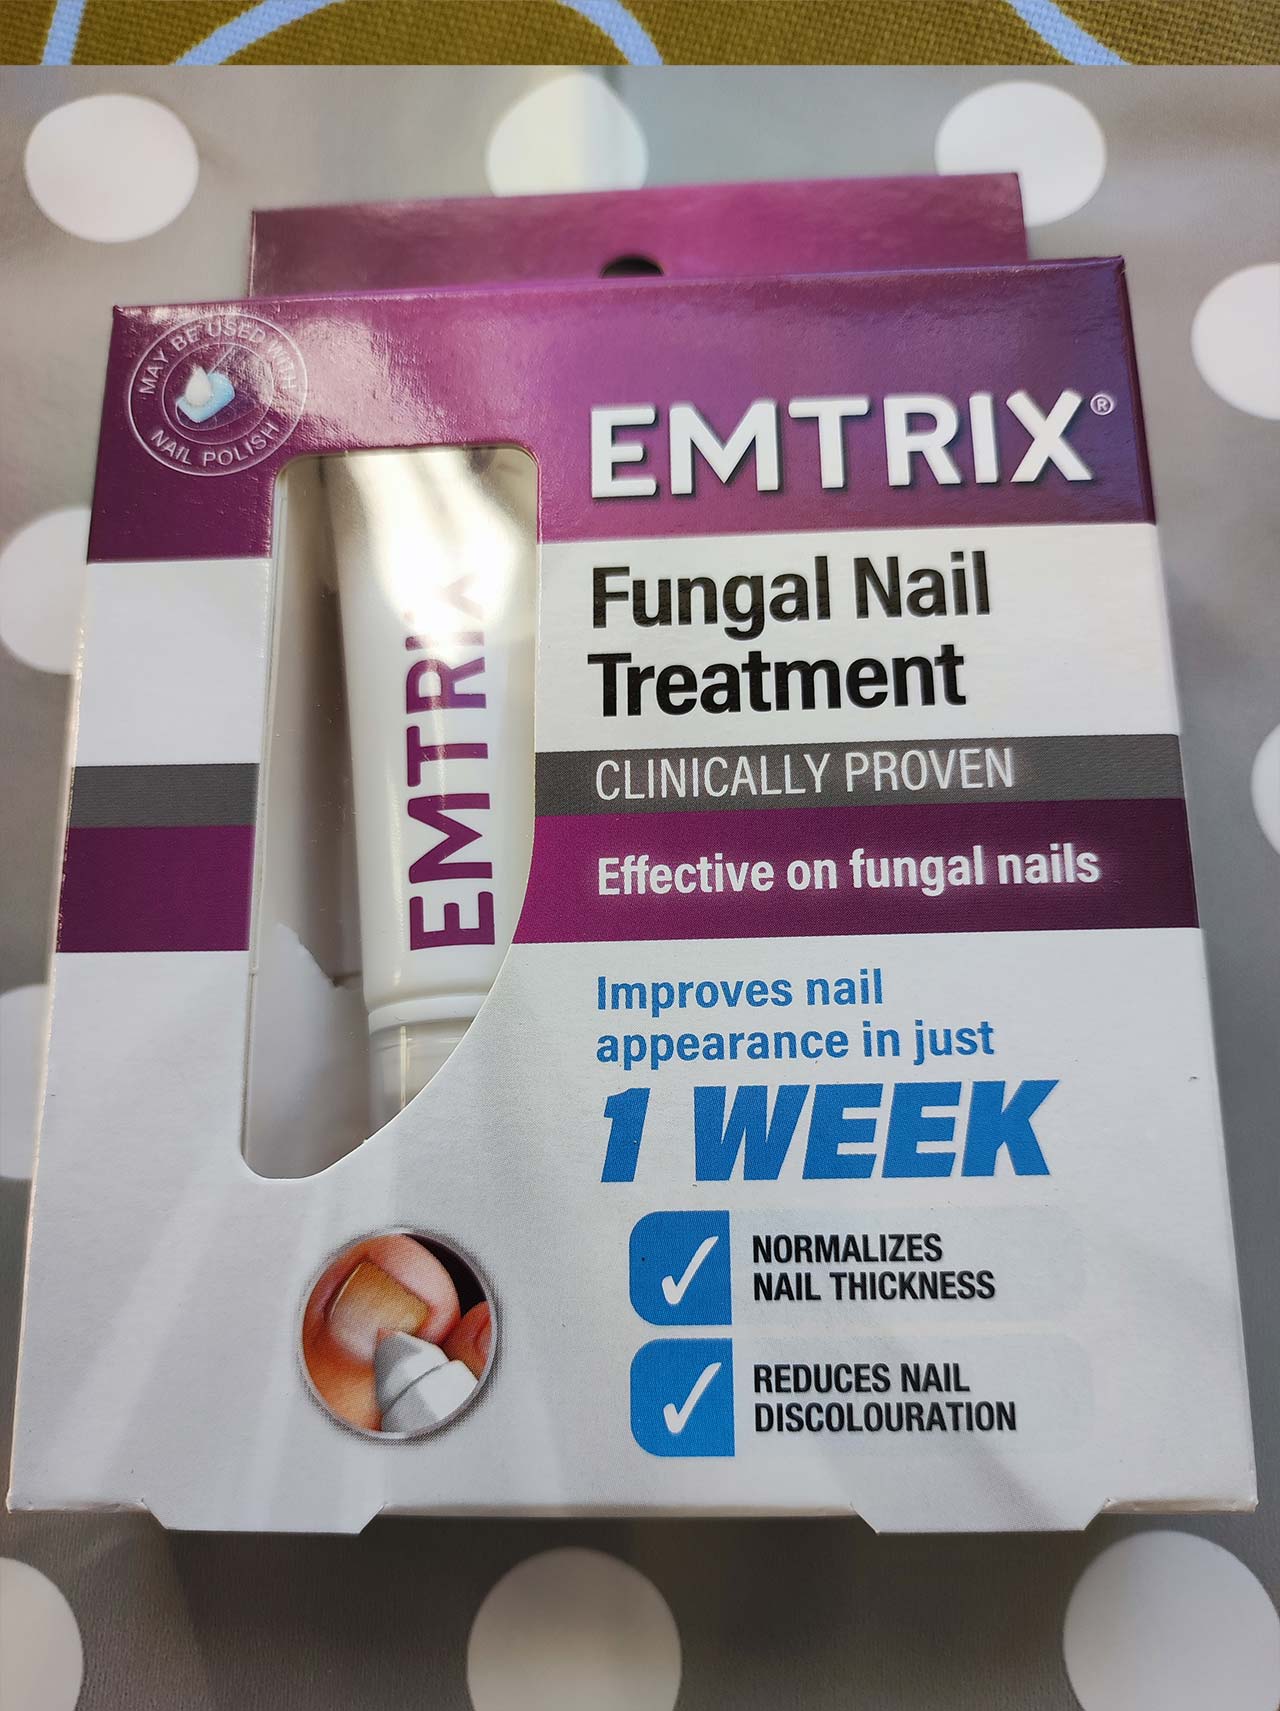 For fungal nail infection or nail psoriasis. Emtrix is suitable for diabetic, pregnant or breast feeding patients. Emtrix softens and improves the appearance of nails. It smoothes the outer layers of the nail plate to restore the condition of nails. It is formulated to discourage fungi by loosening them from the nail plate.